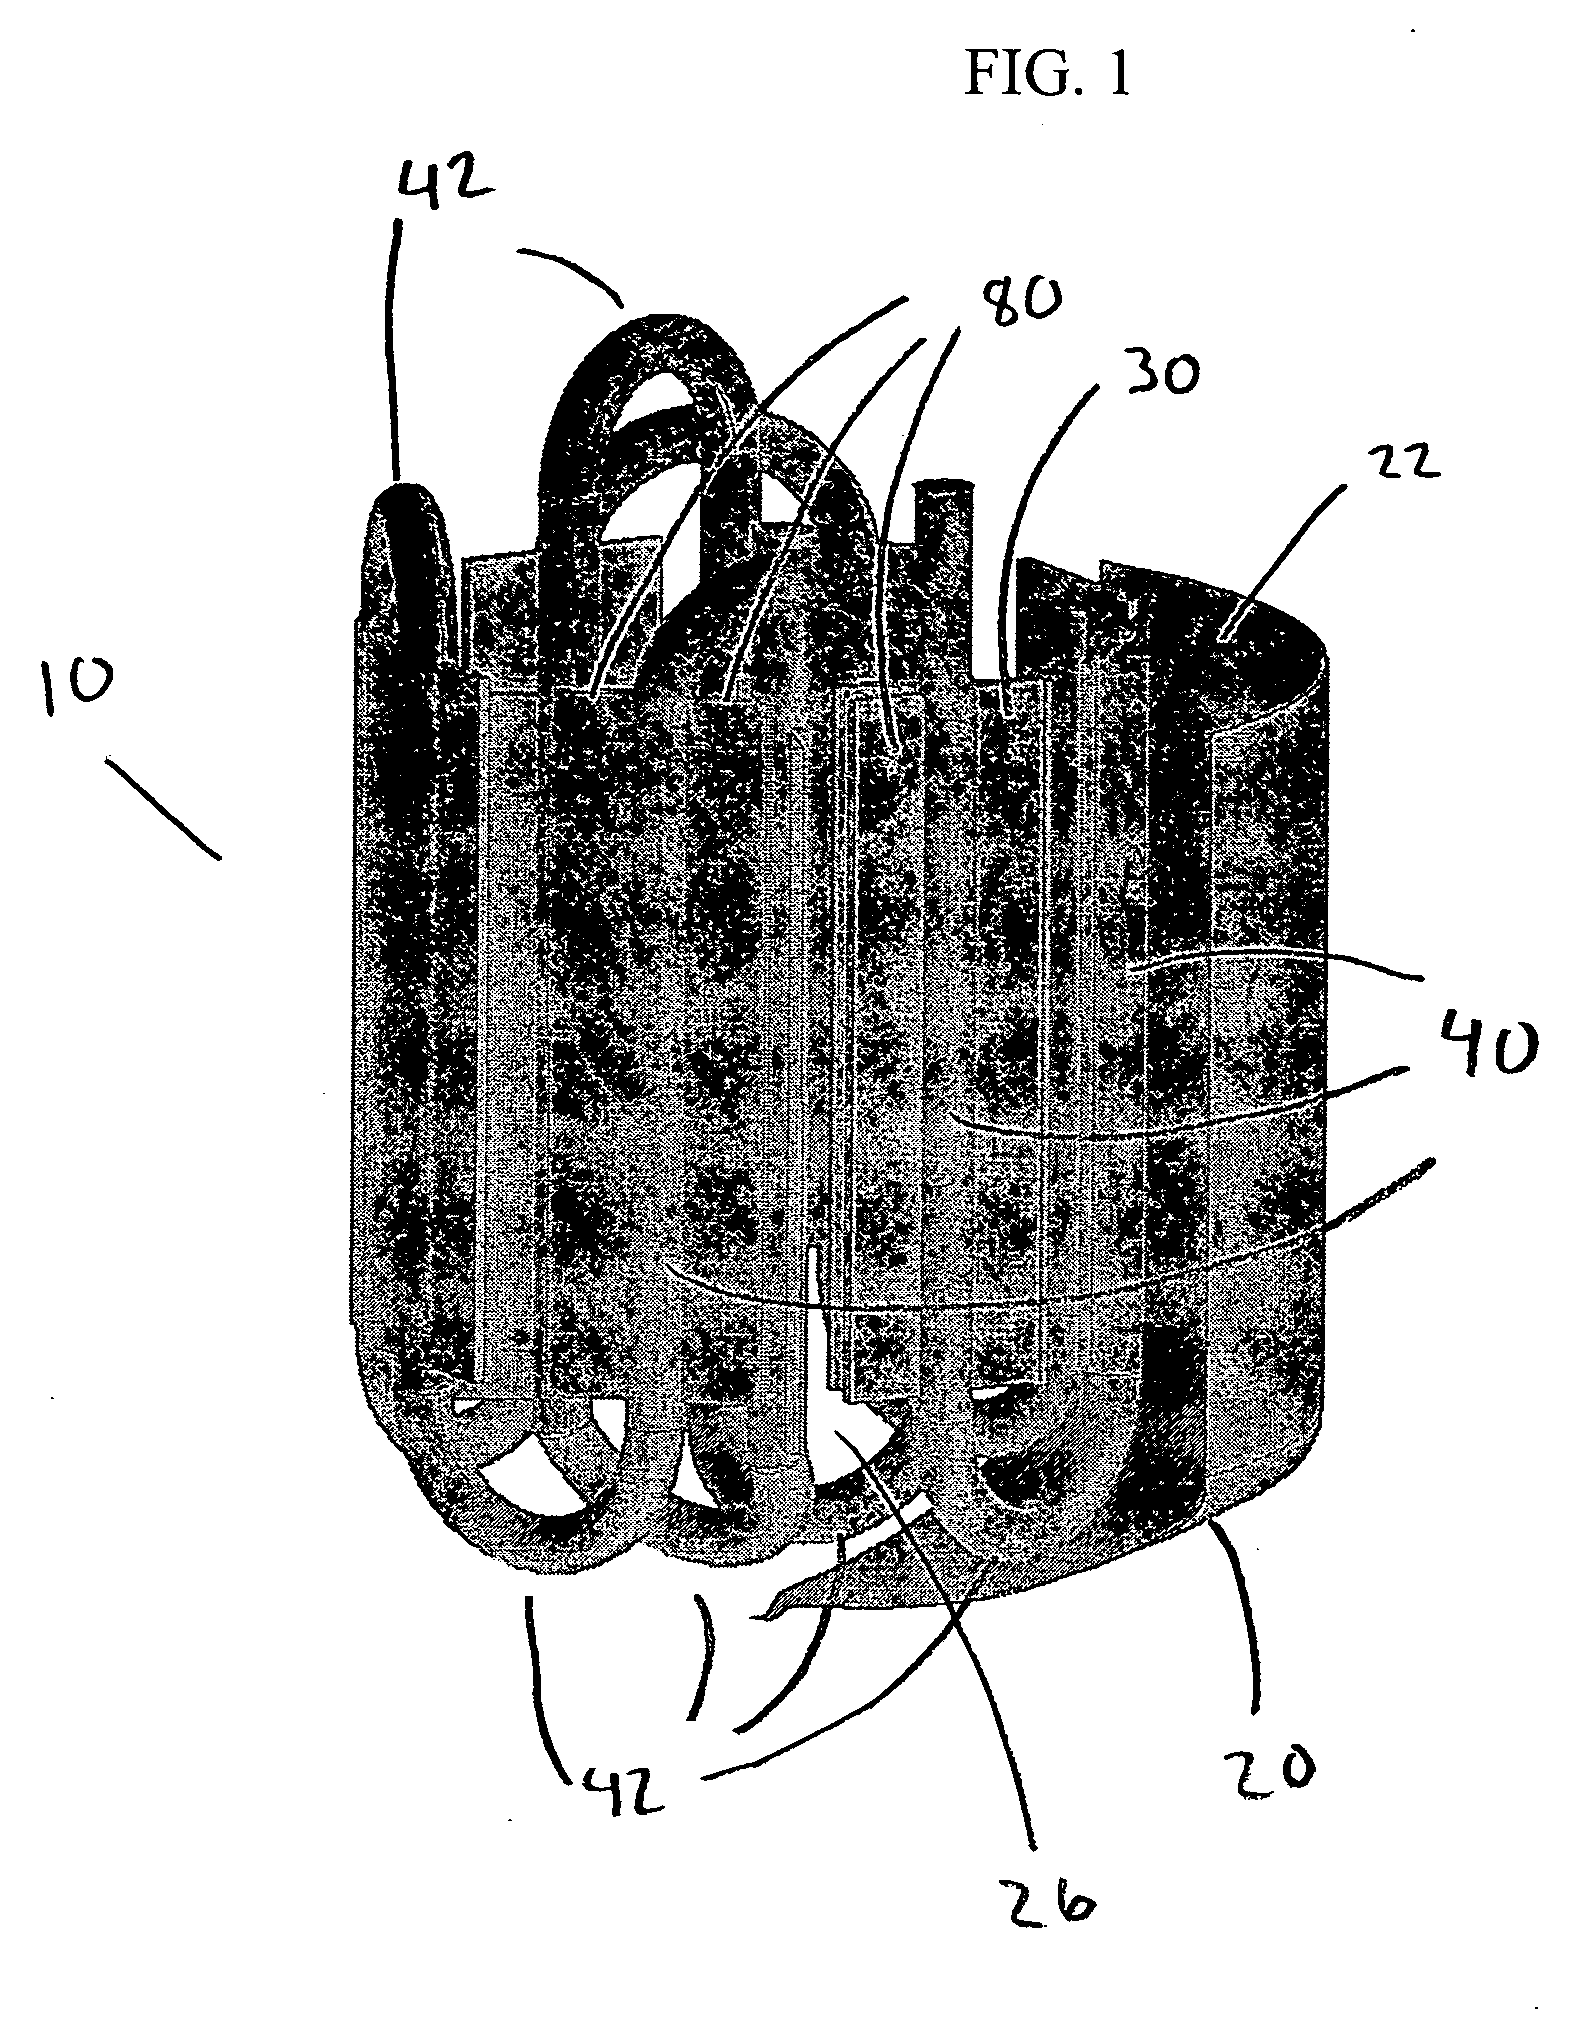 Heating and cooling system for biological materials